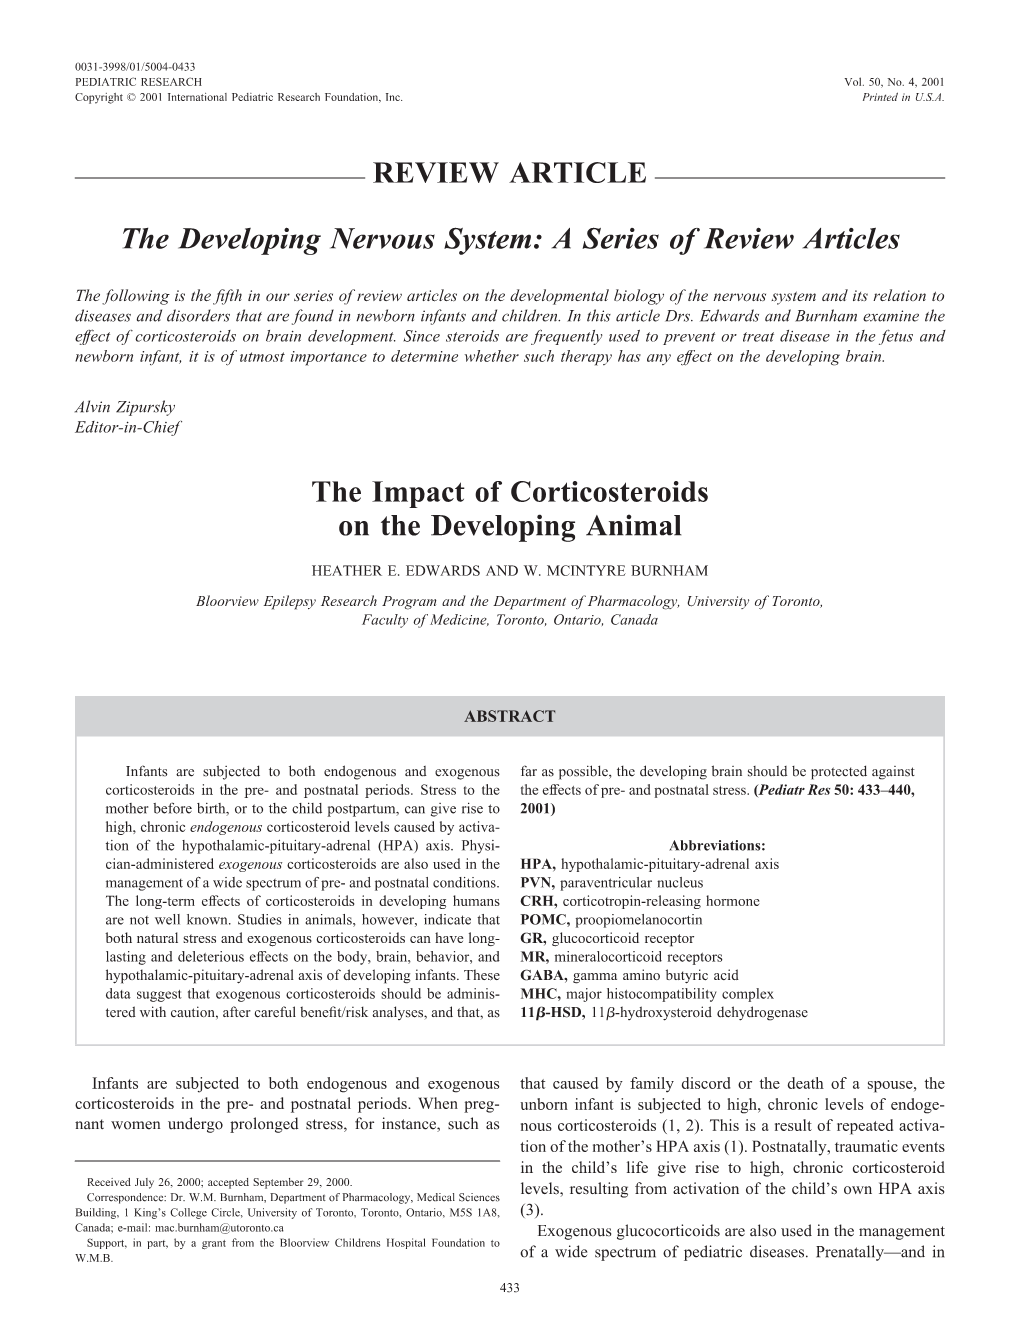 REVIEW ARTICLE the Developing Nervous System